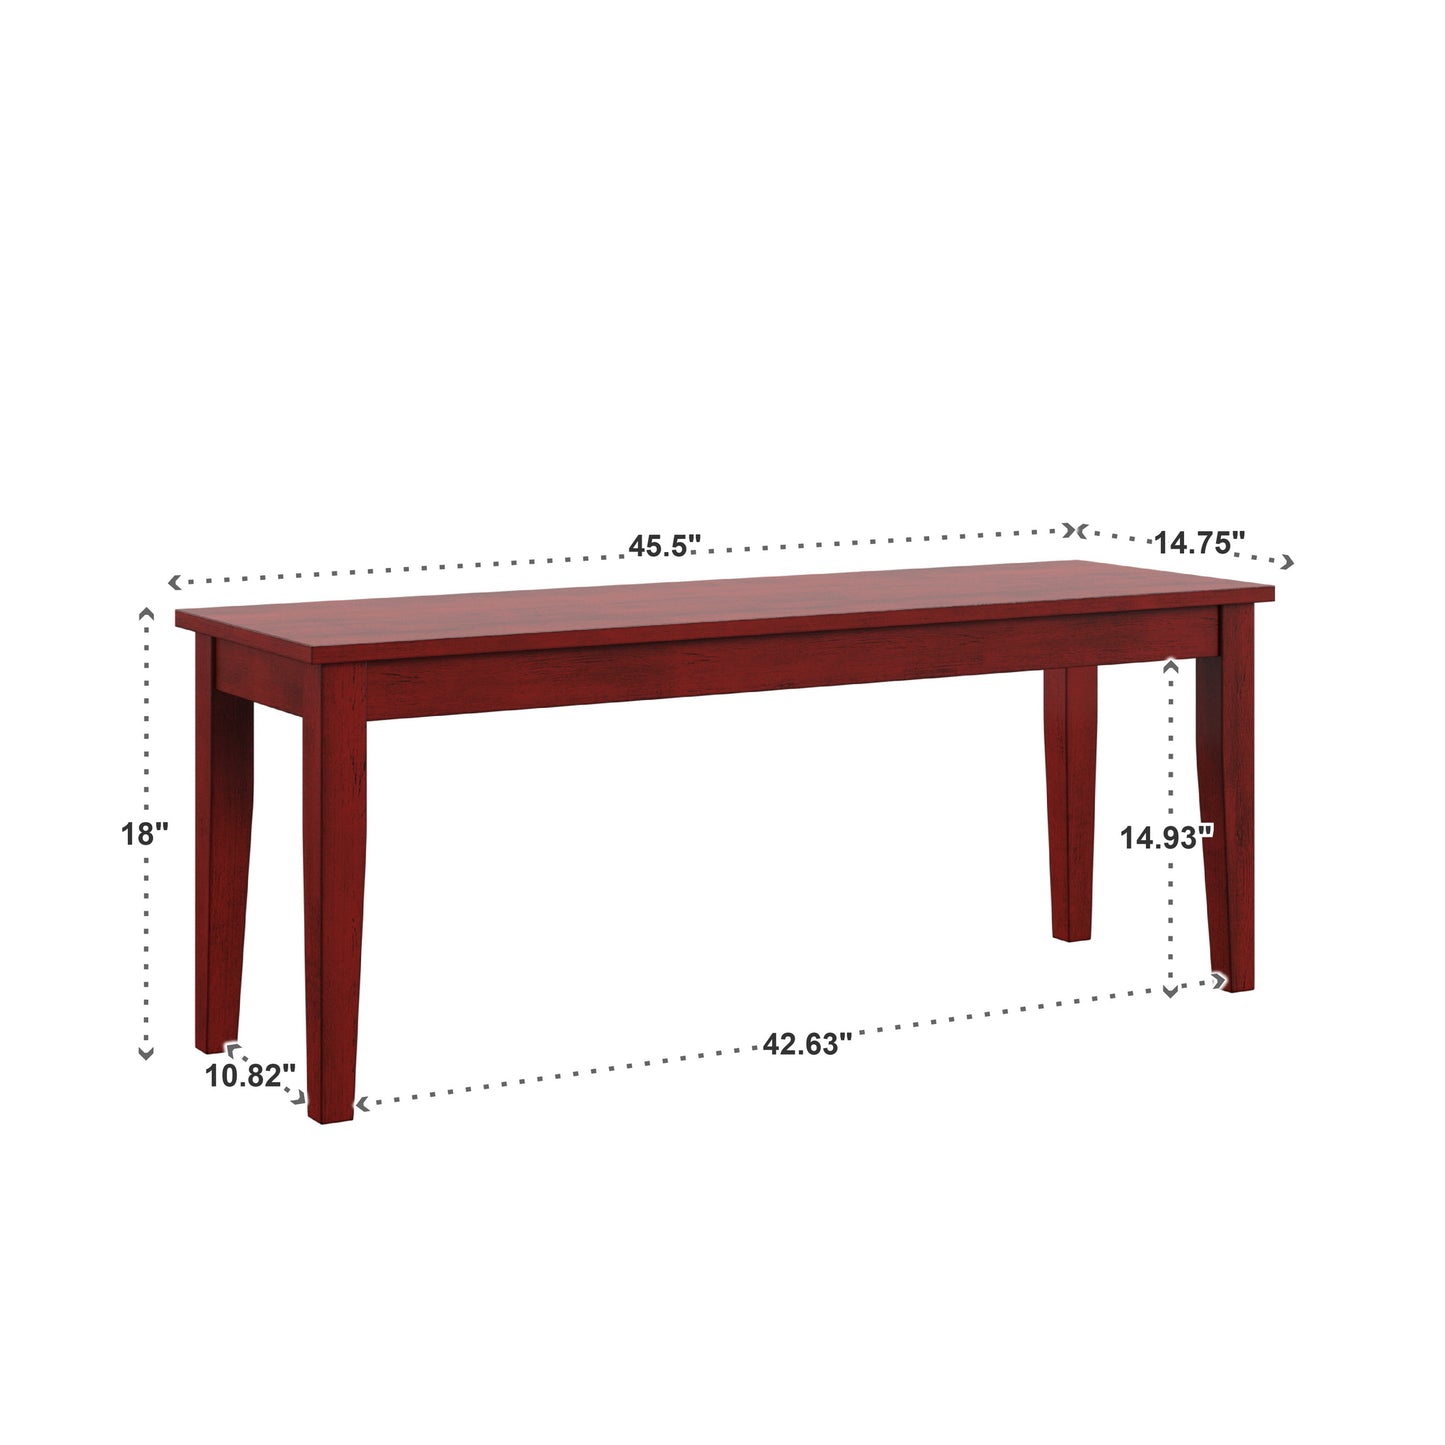 Wood Dining Bench - Antique Berry Finish